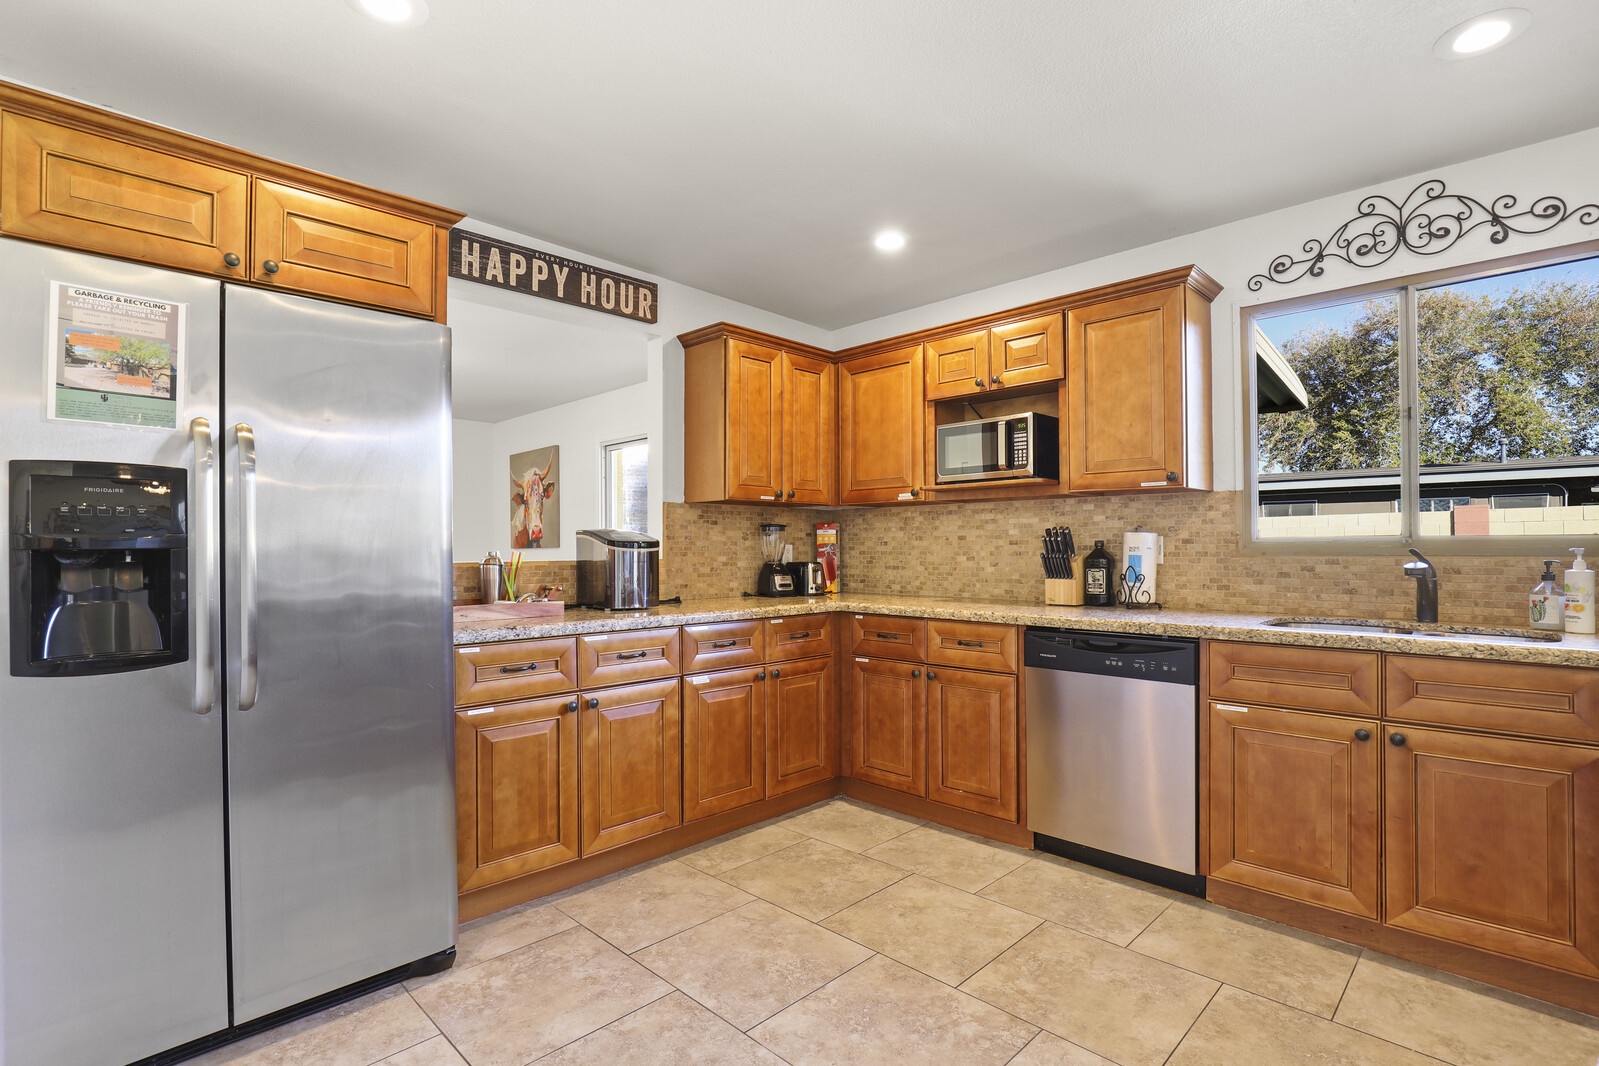 Modern stainless steel appliances including: dishwasher, fridge, oven, microwave, stove top, coffee maker, pots and pans, and utensils.